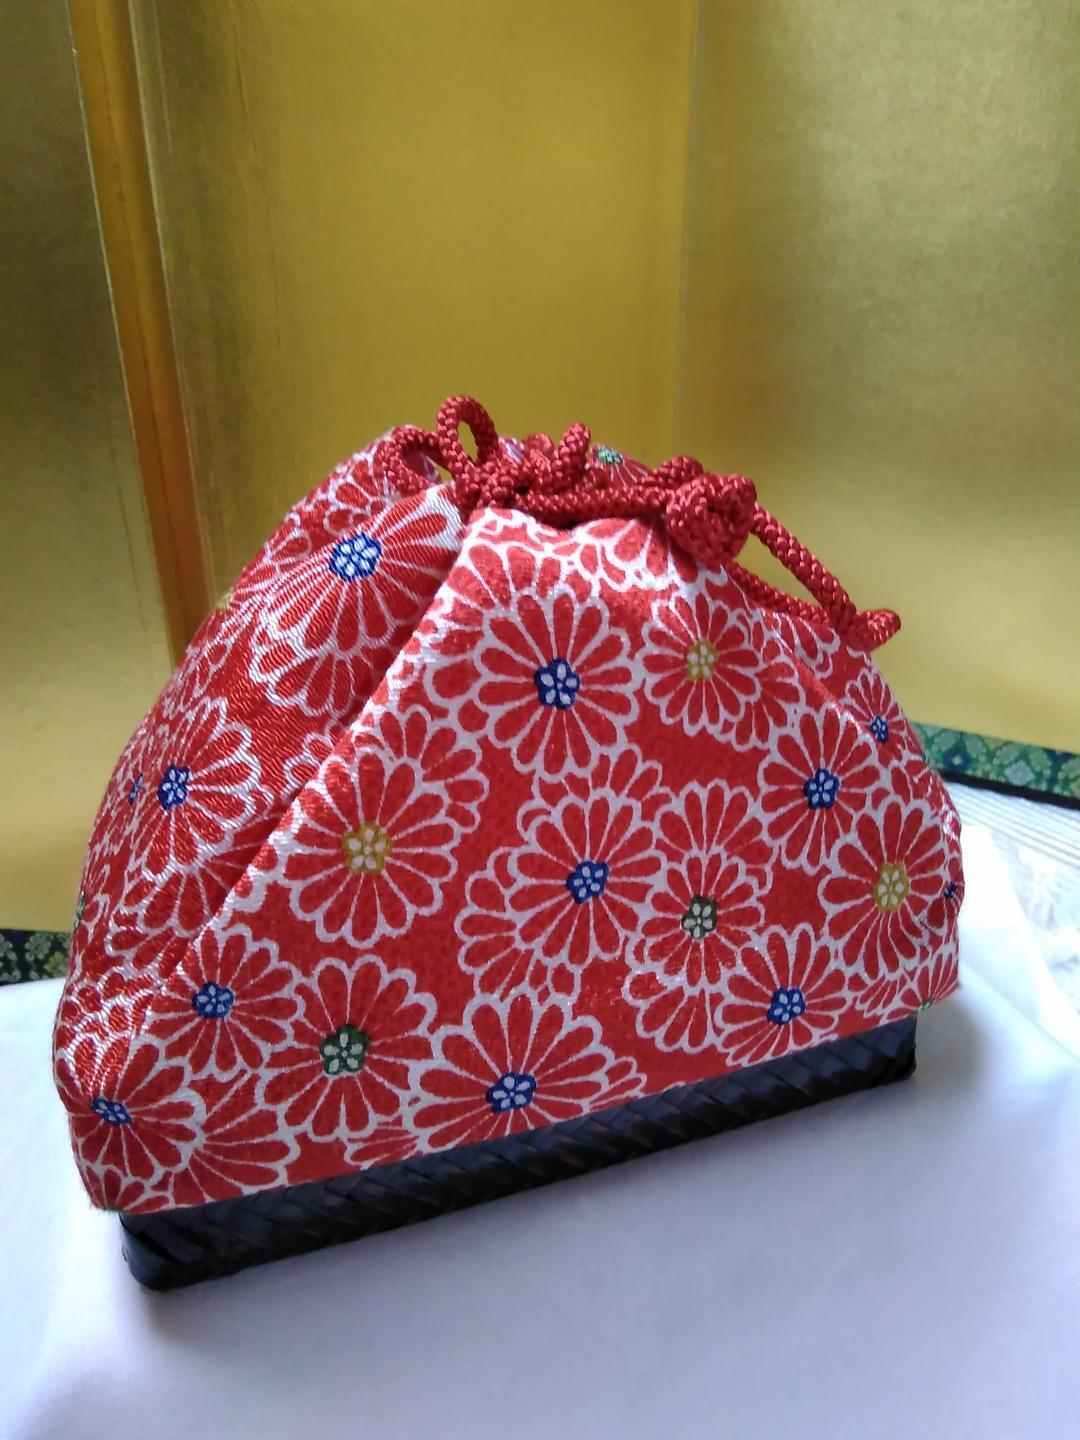 How About A Bamboo Basket Drawstring Bag, Red Crepe Fabric, Flowers, Pongee, Sma